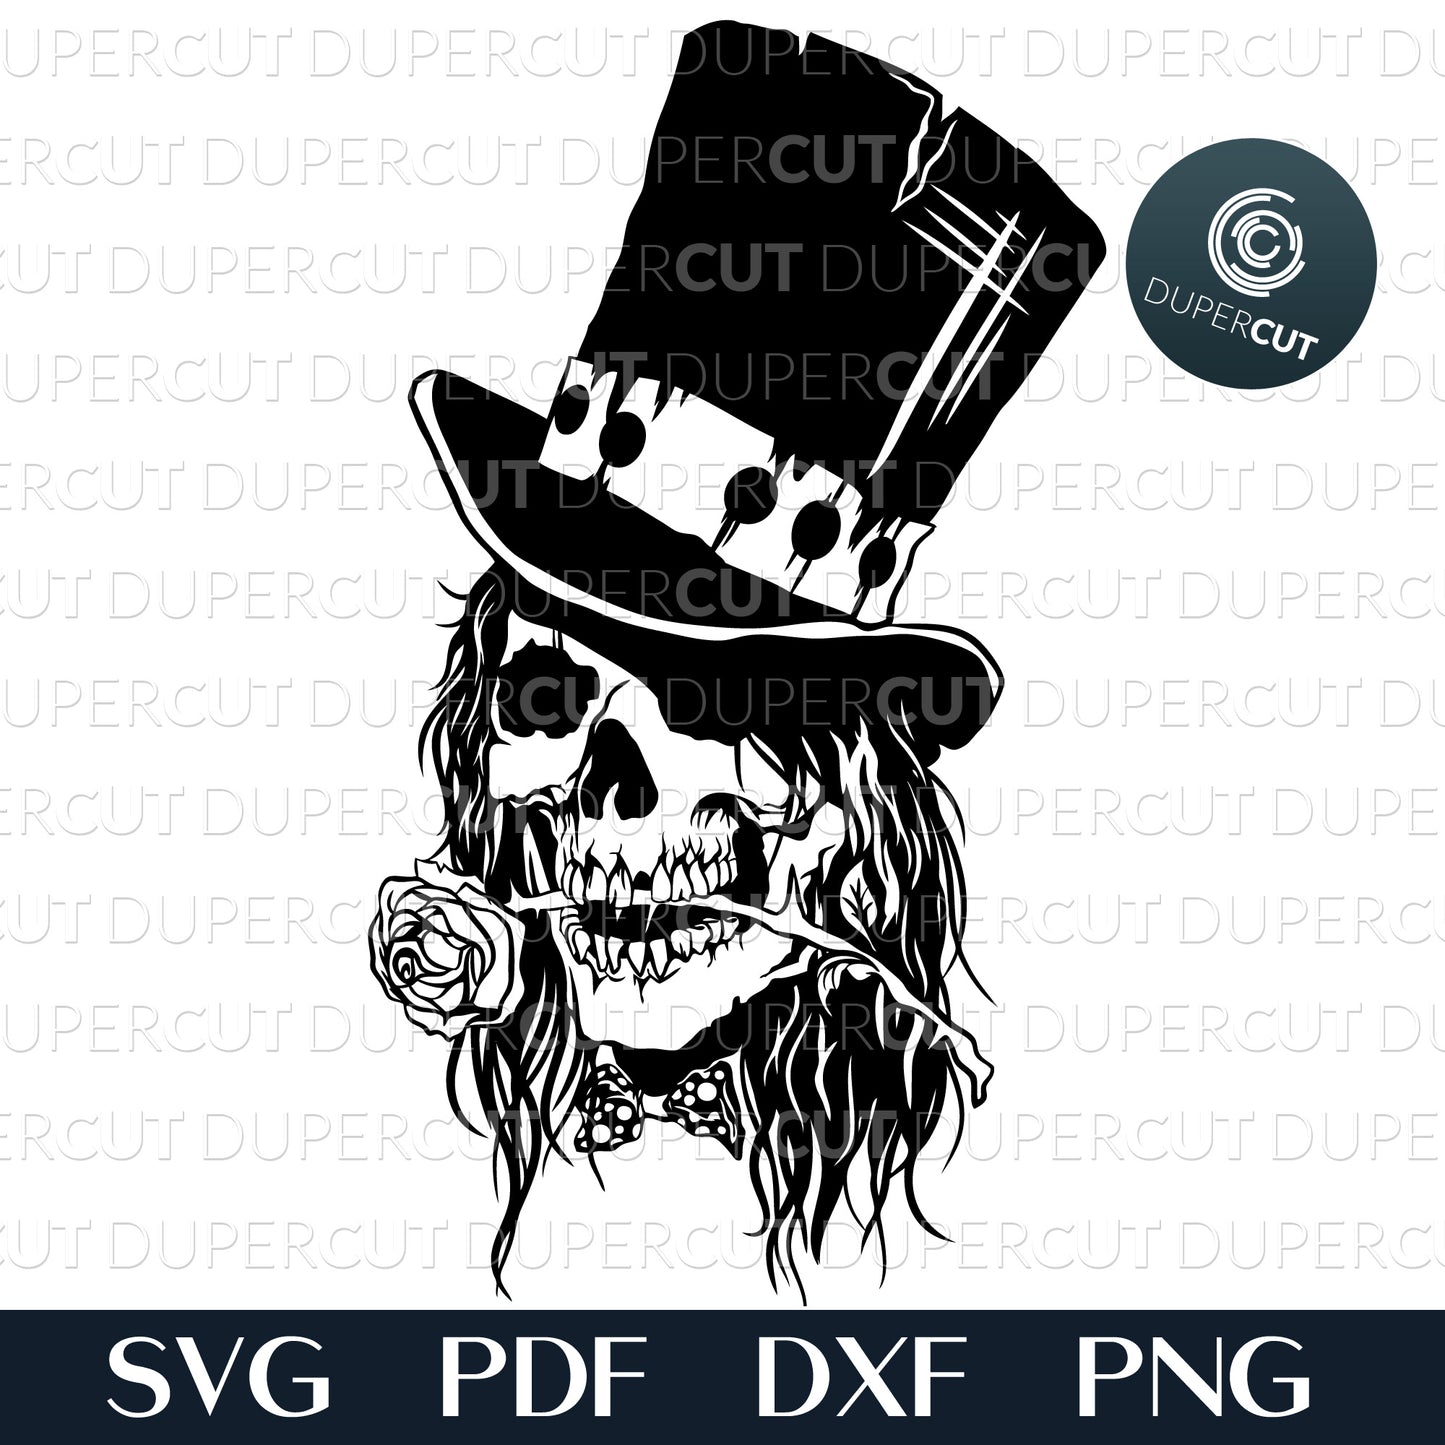 Top hat skull with rose and bow tie, gothic steampunk vector. SVG PNG DXF cutting files for Cricut, Silhouette, Glowforge, print on demand, sublimation templates